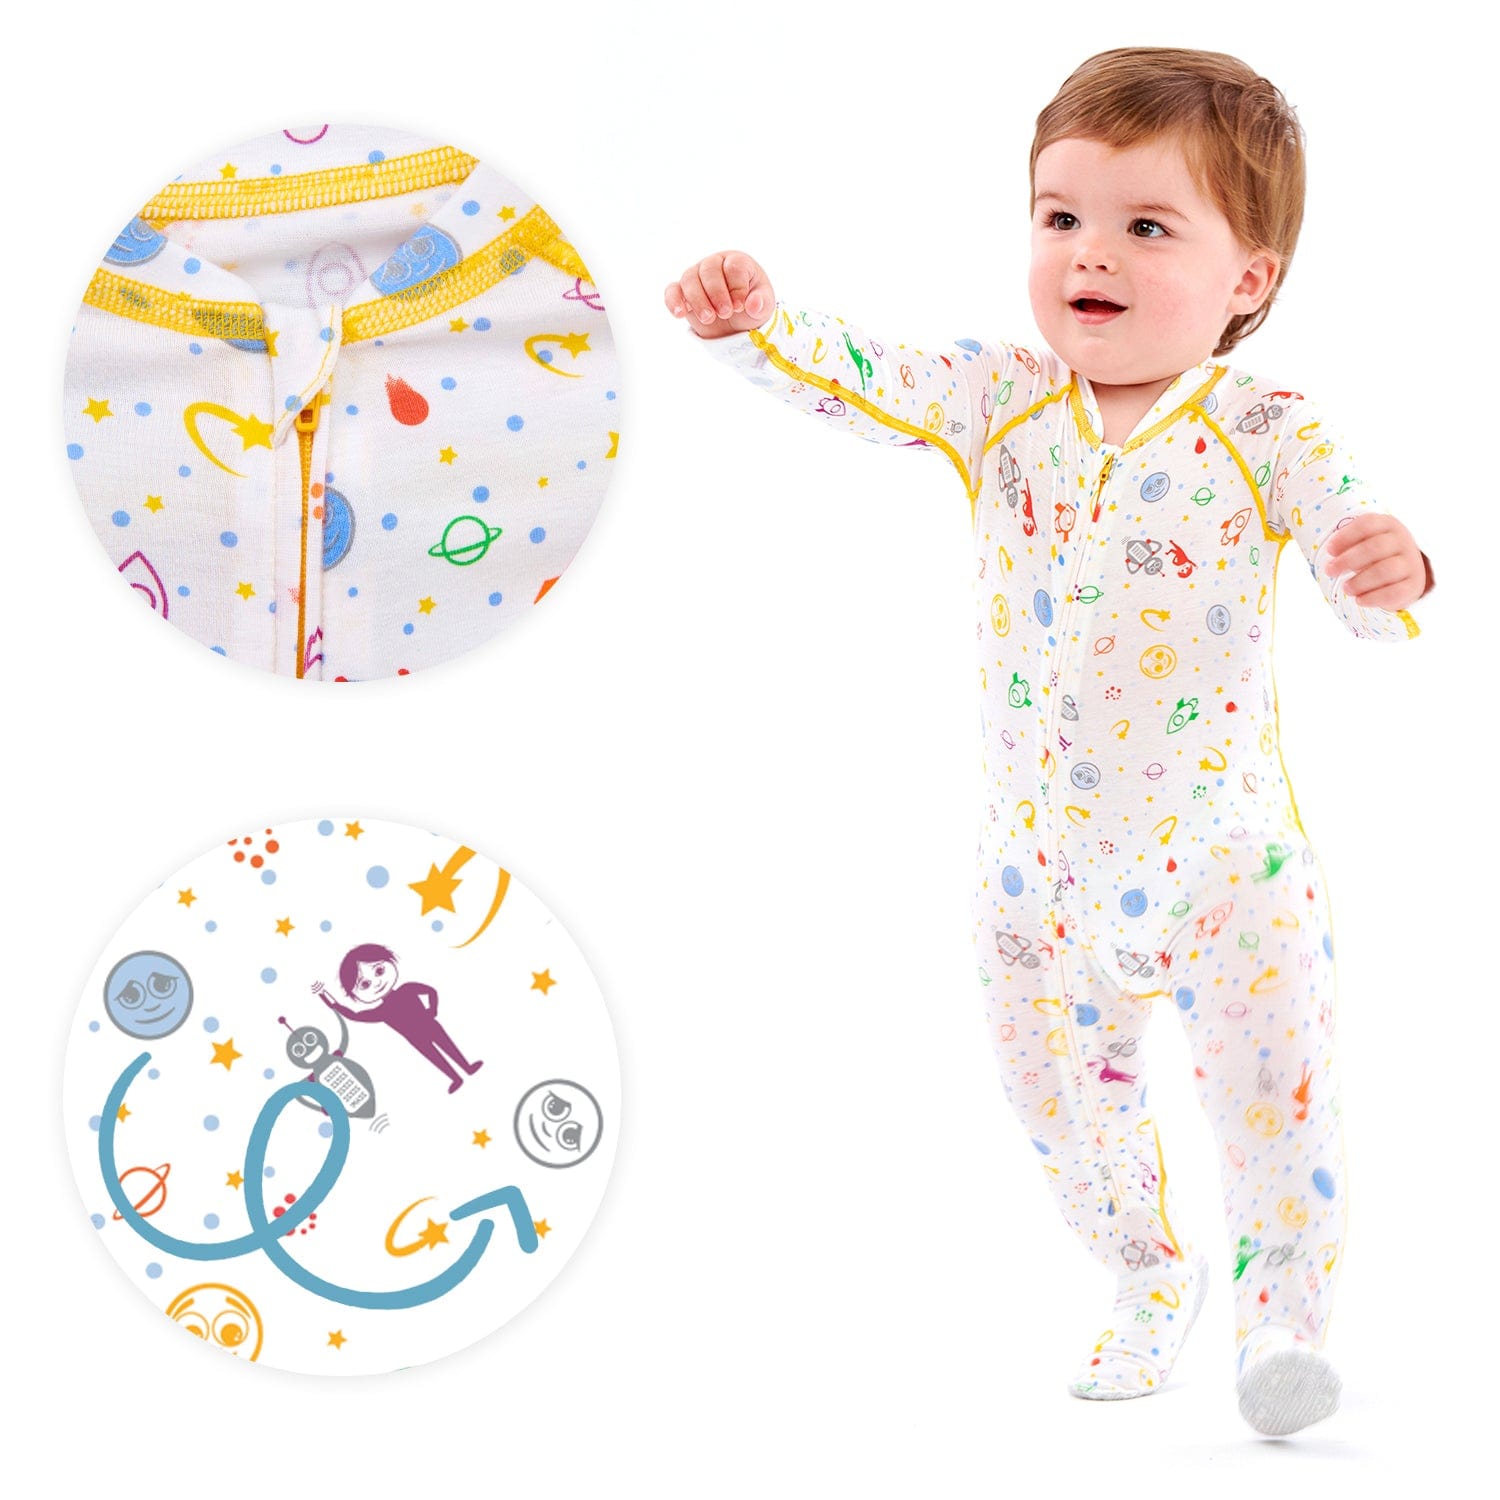 “Eczema Baby Pajamas Sleep suit made from Zinc TENCEL for Wet Wrapping Therapy and Itch Relief”